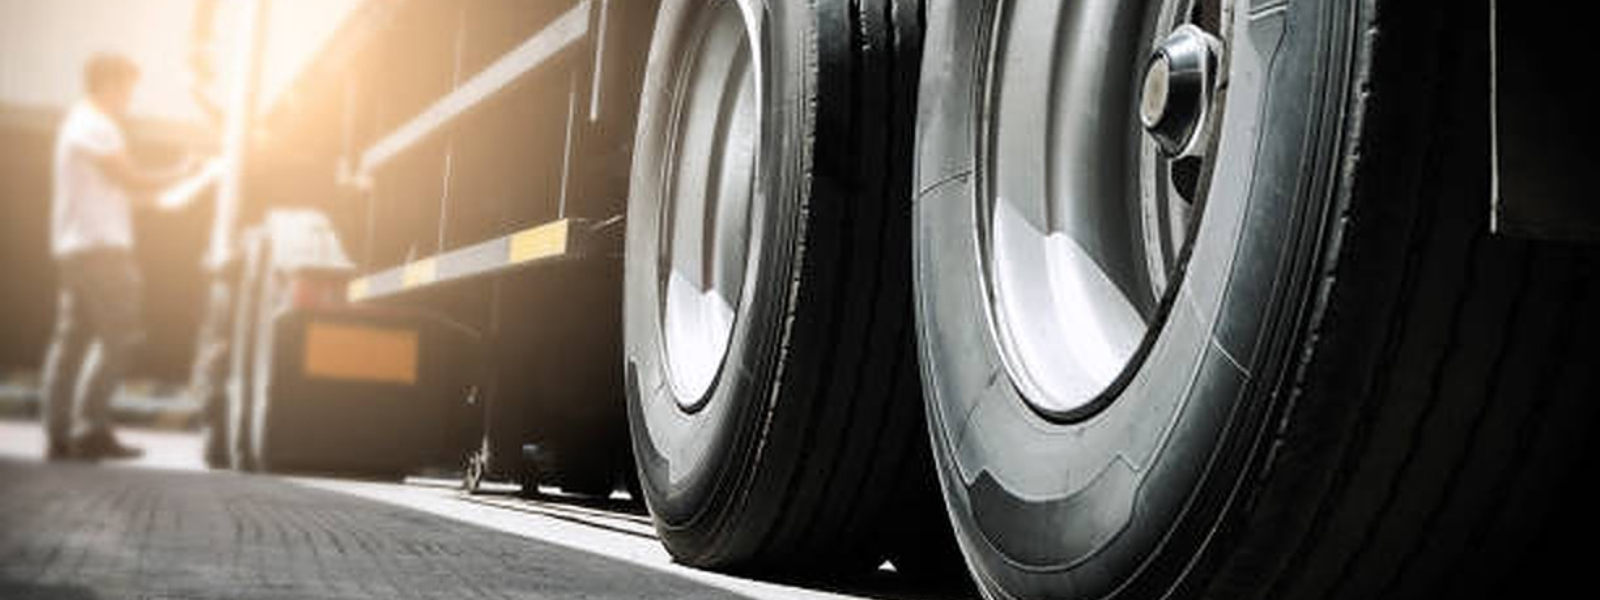 TRUCKSPOT OÜ - Maintenance of climate systems, Sales of truck tyres, Semi-montage of tyres, Full tyre assembly, Replaceme...